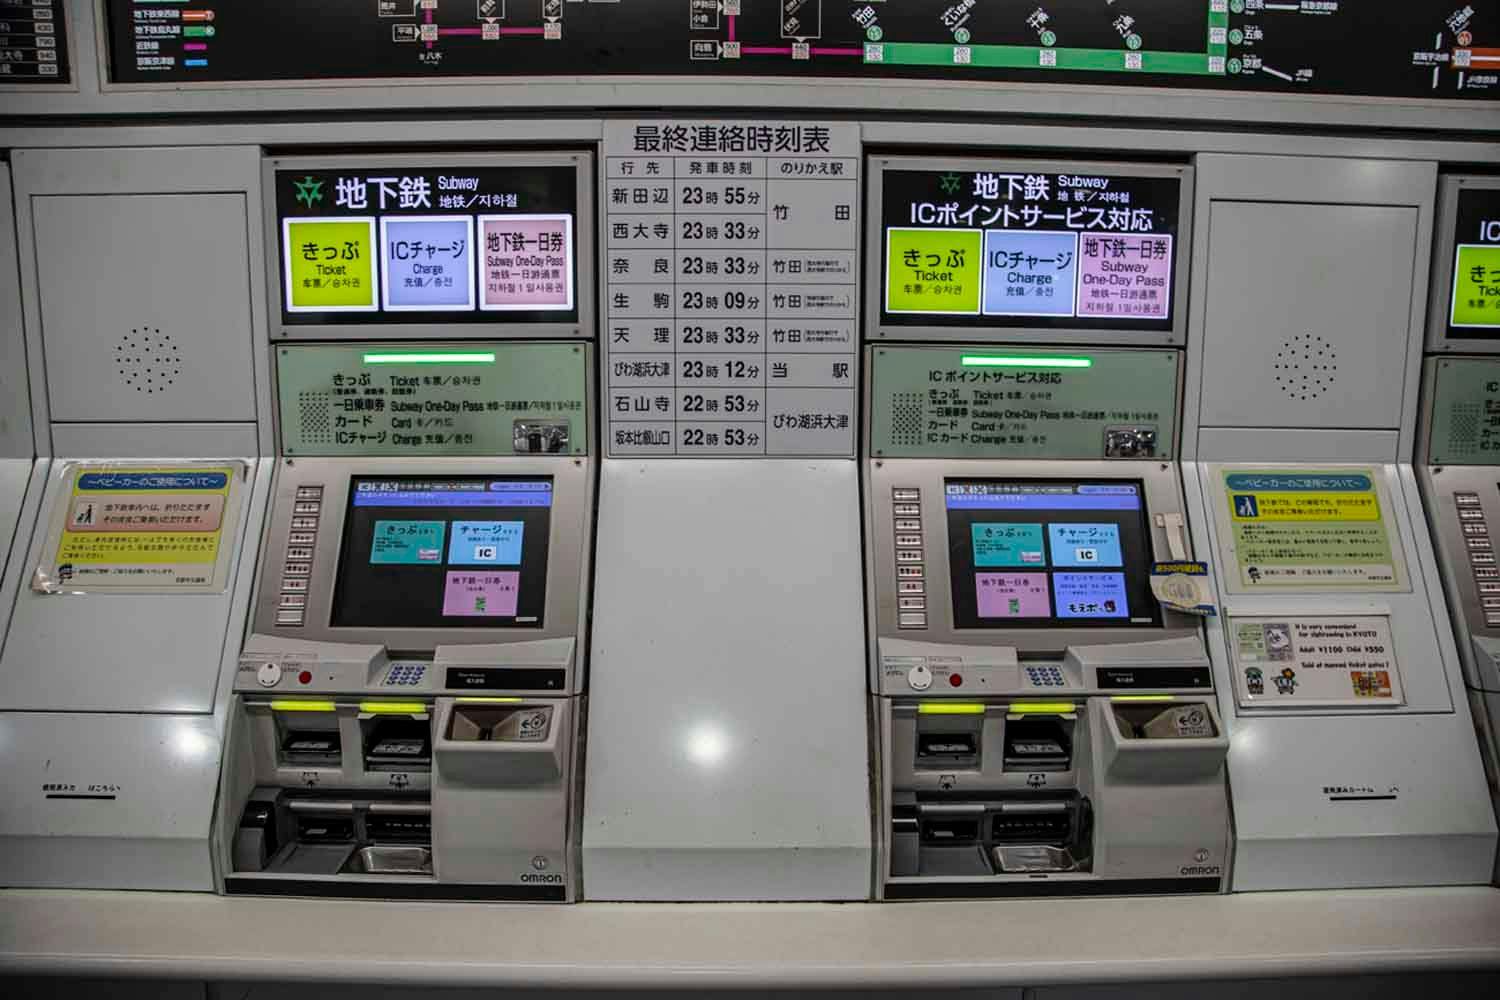 A ticket machine where you can charge your IC card. This particular machine is in the Kyoto subway. Photo source: James Saunders-Wyndham